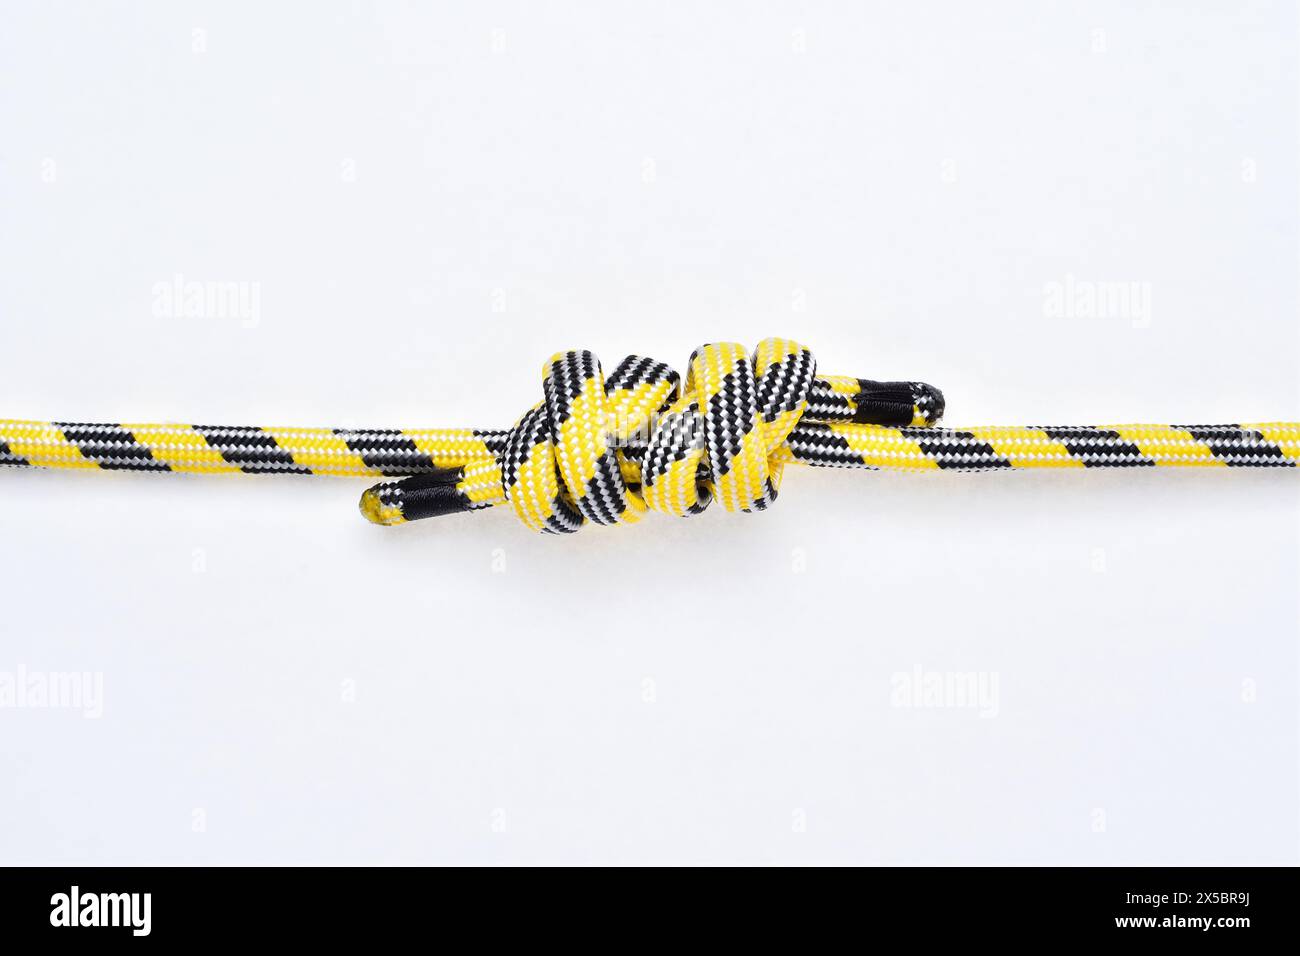 Double Fisherman's knot on yellow and black nylon rope on white background. Stock Photo